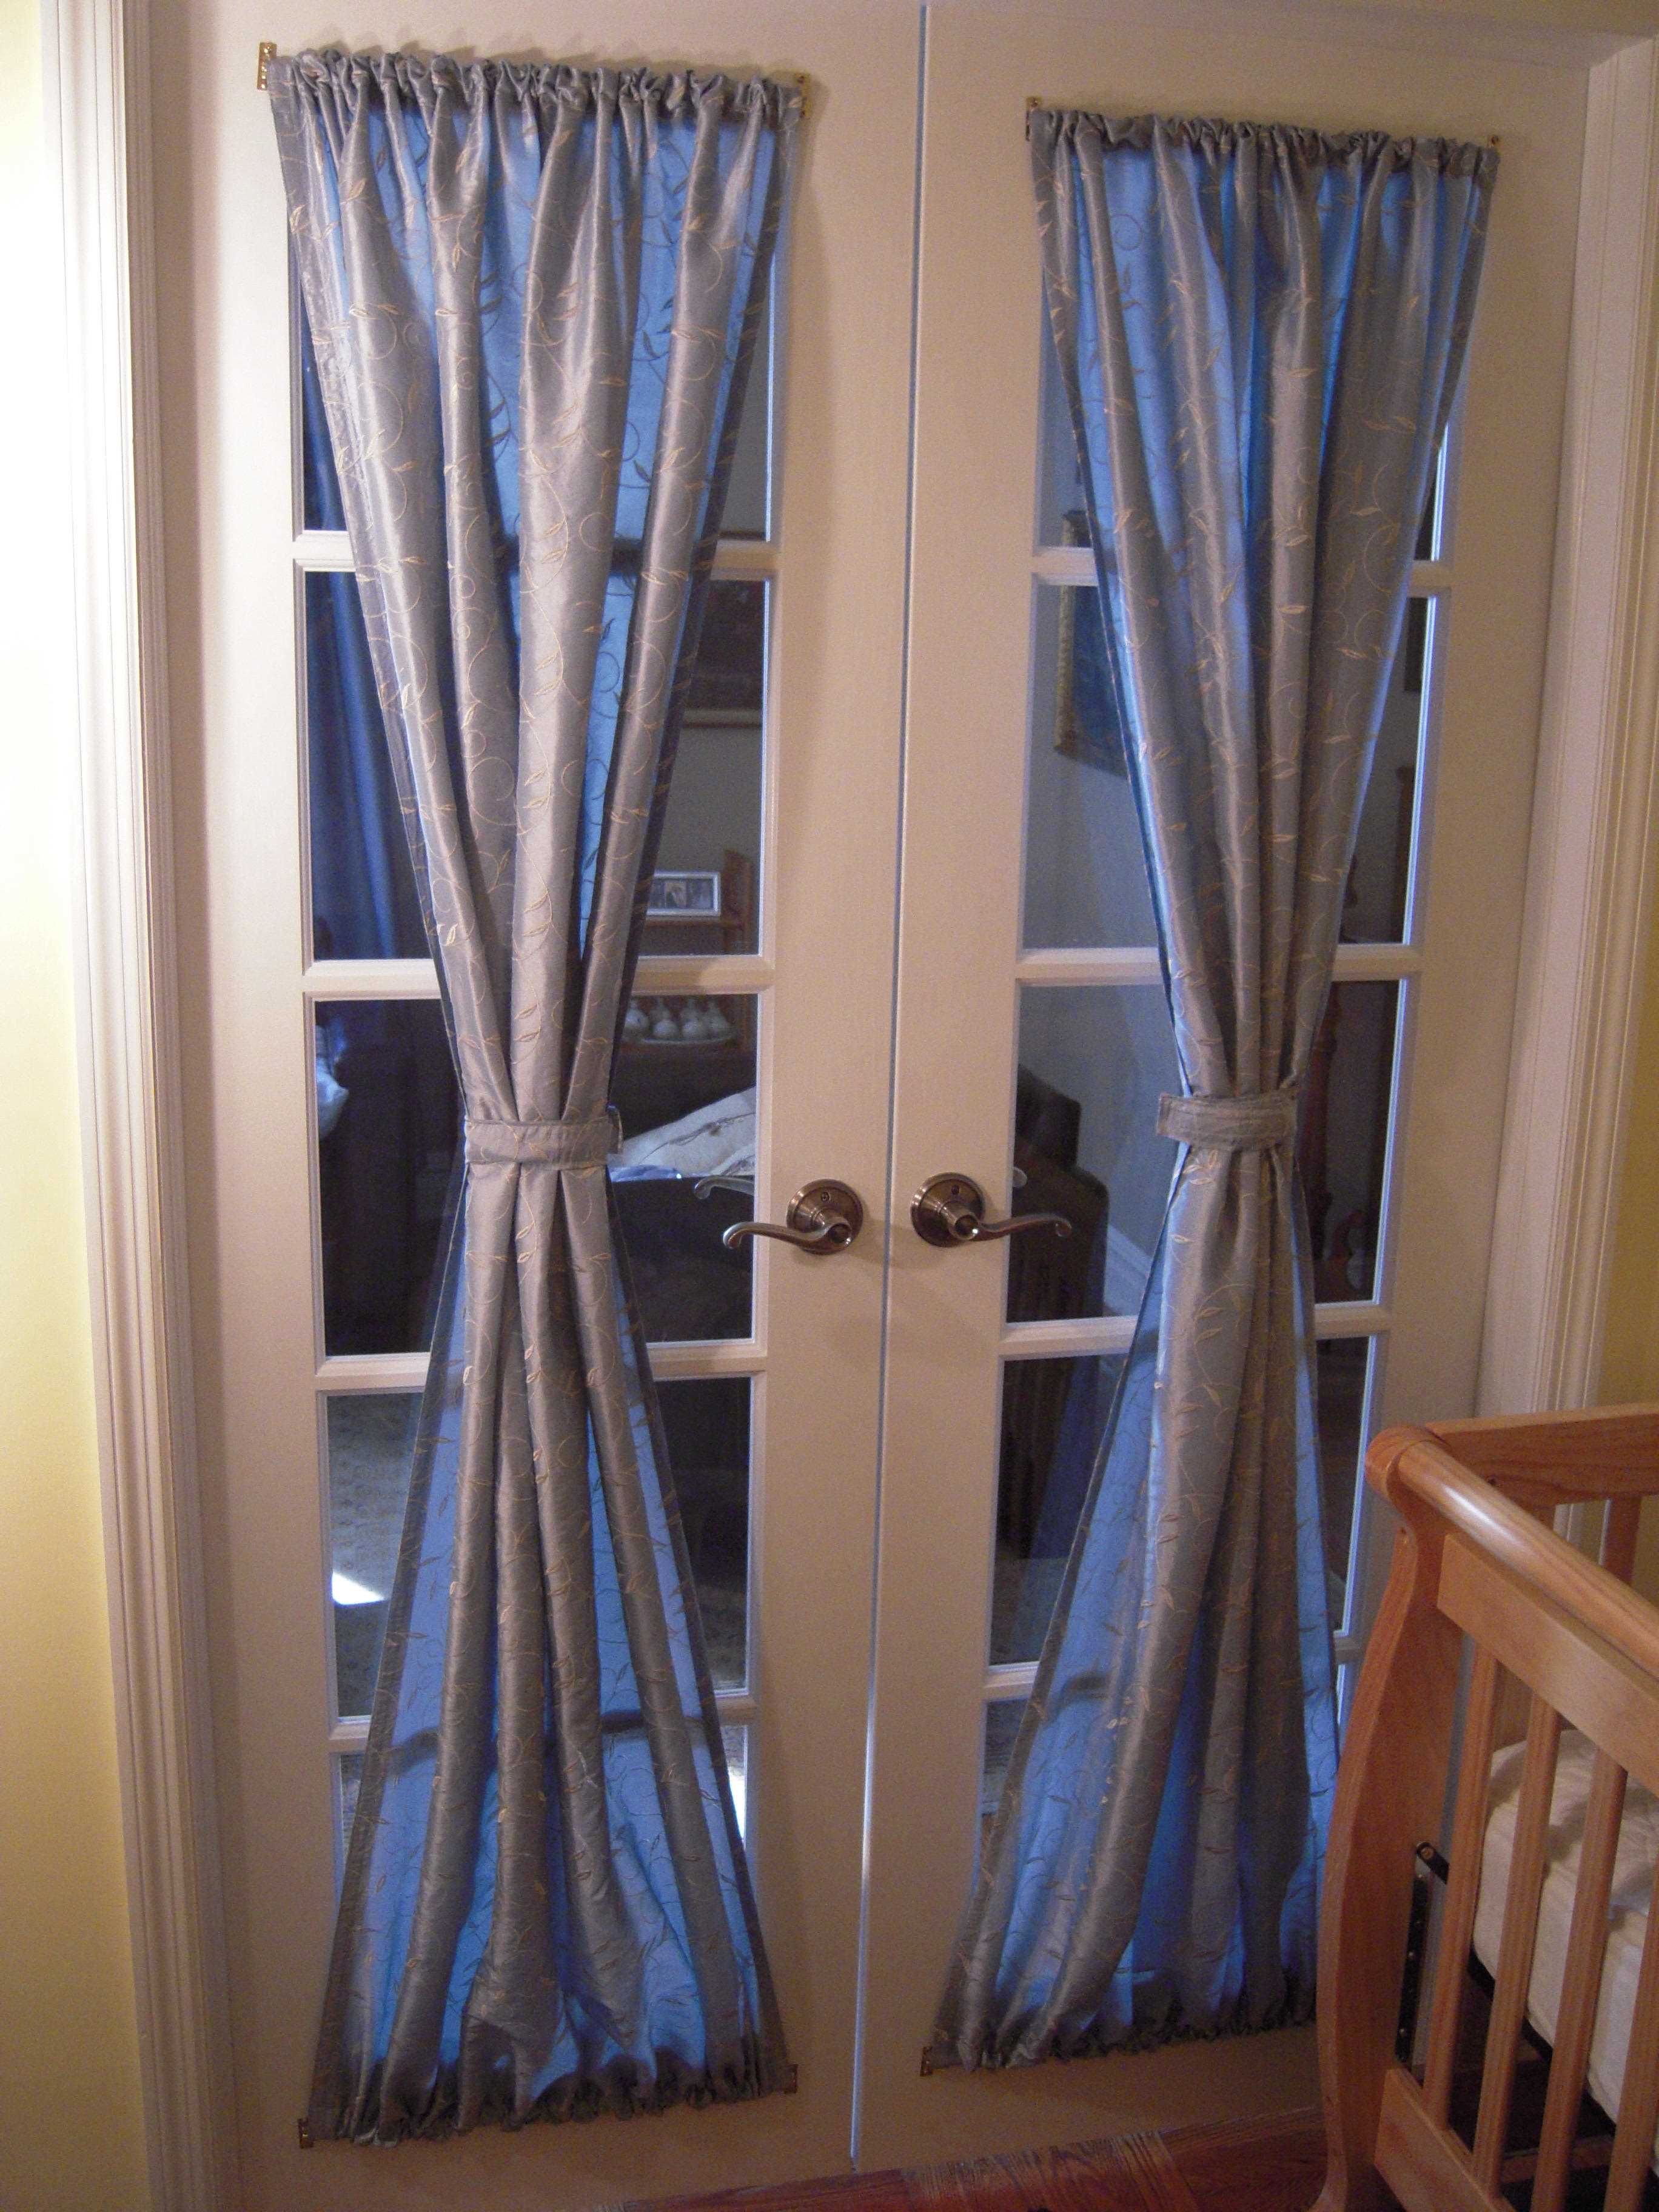 version of the original decorative curtains in the style of the apartment